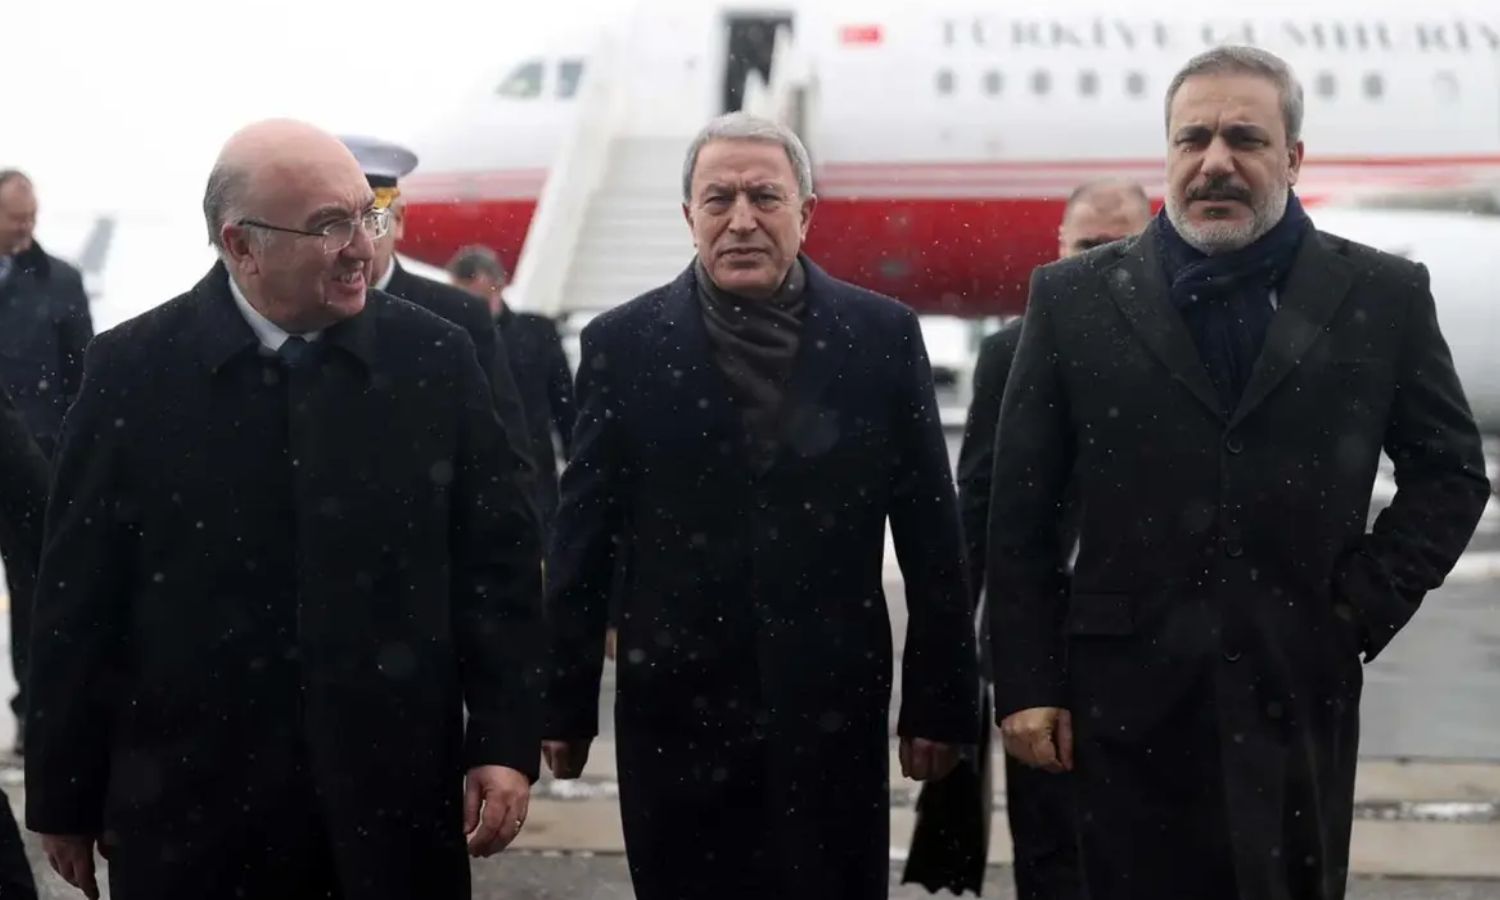 Turkish Defense Minister Hulusi Akar and then Turkish Intelligence Chief Hakan Fidan in Moscow to attend the ministerial meeting with Russia and the Syrian regime - December 28, 2022 (Turkish Ministry of Defense)